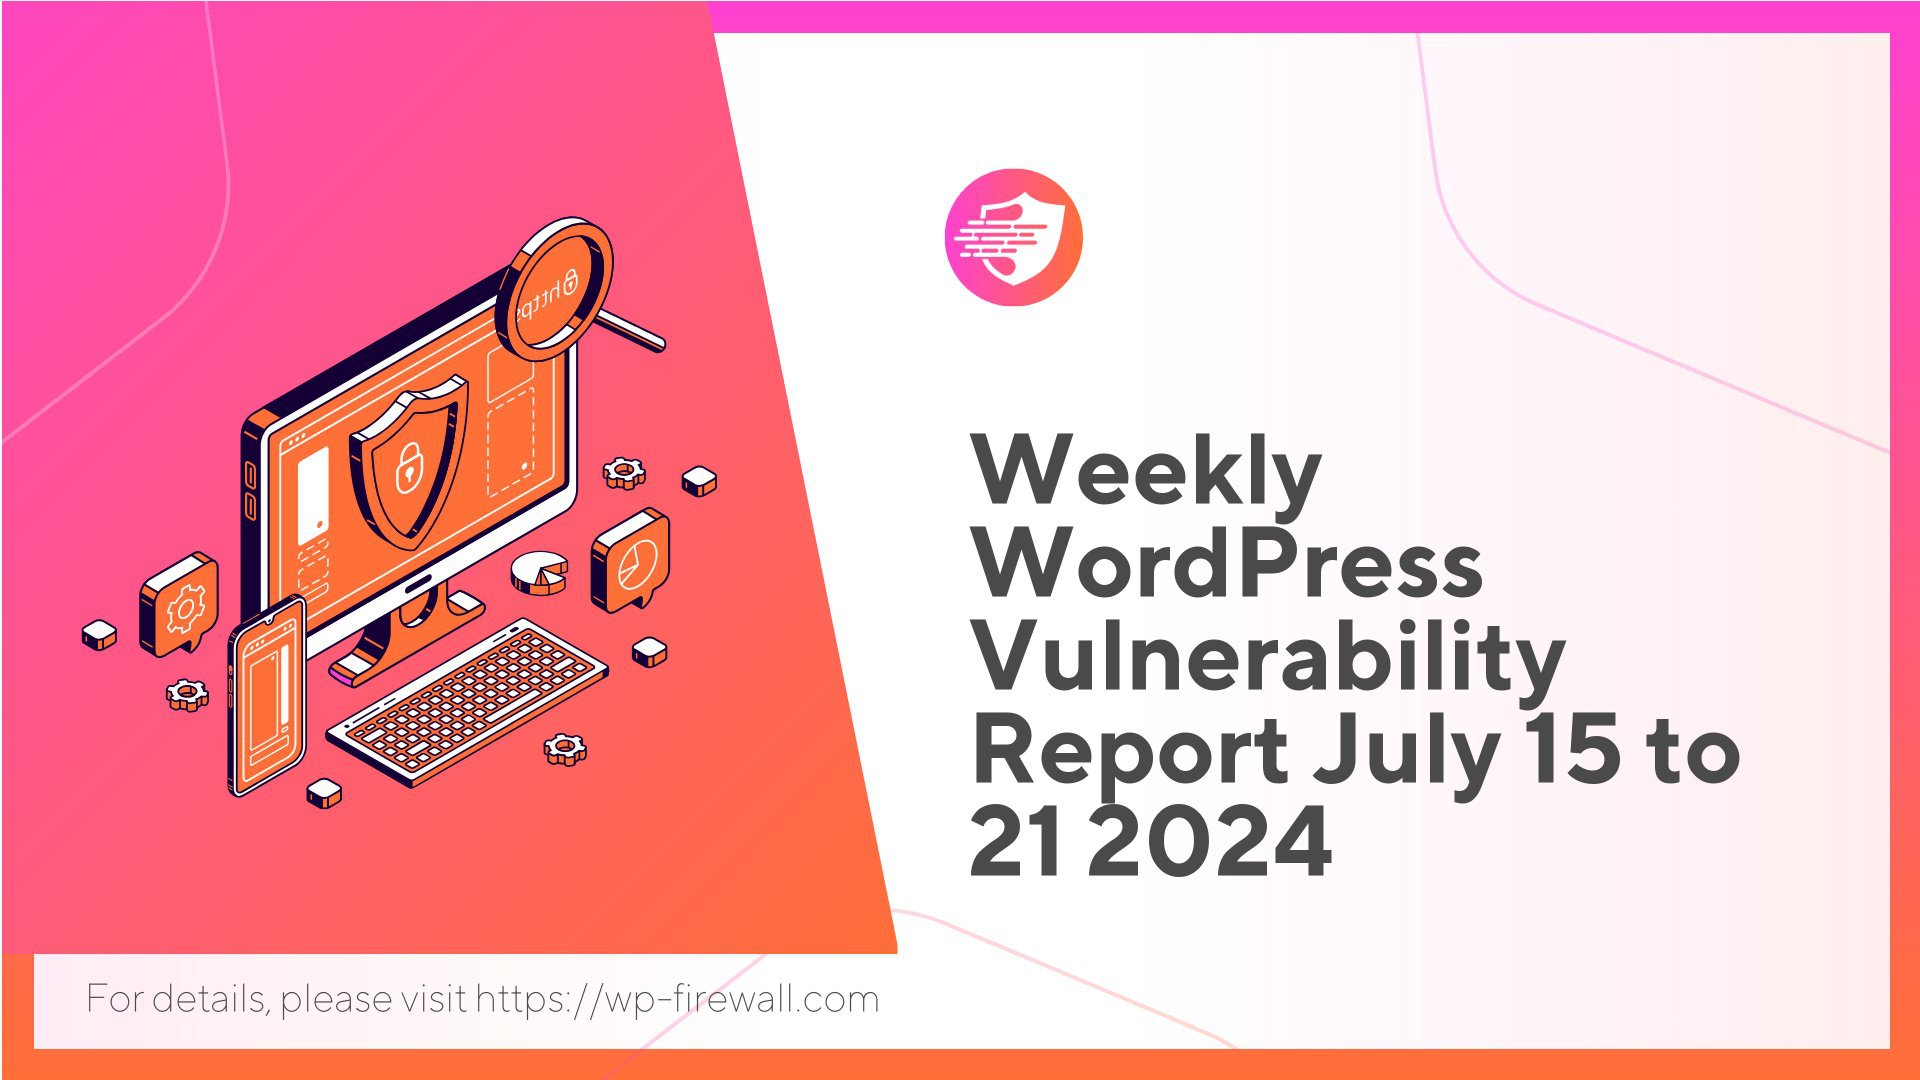 Weekly WordPress Vulnerability Report July 15 to 21 2024 cover